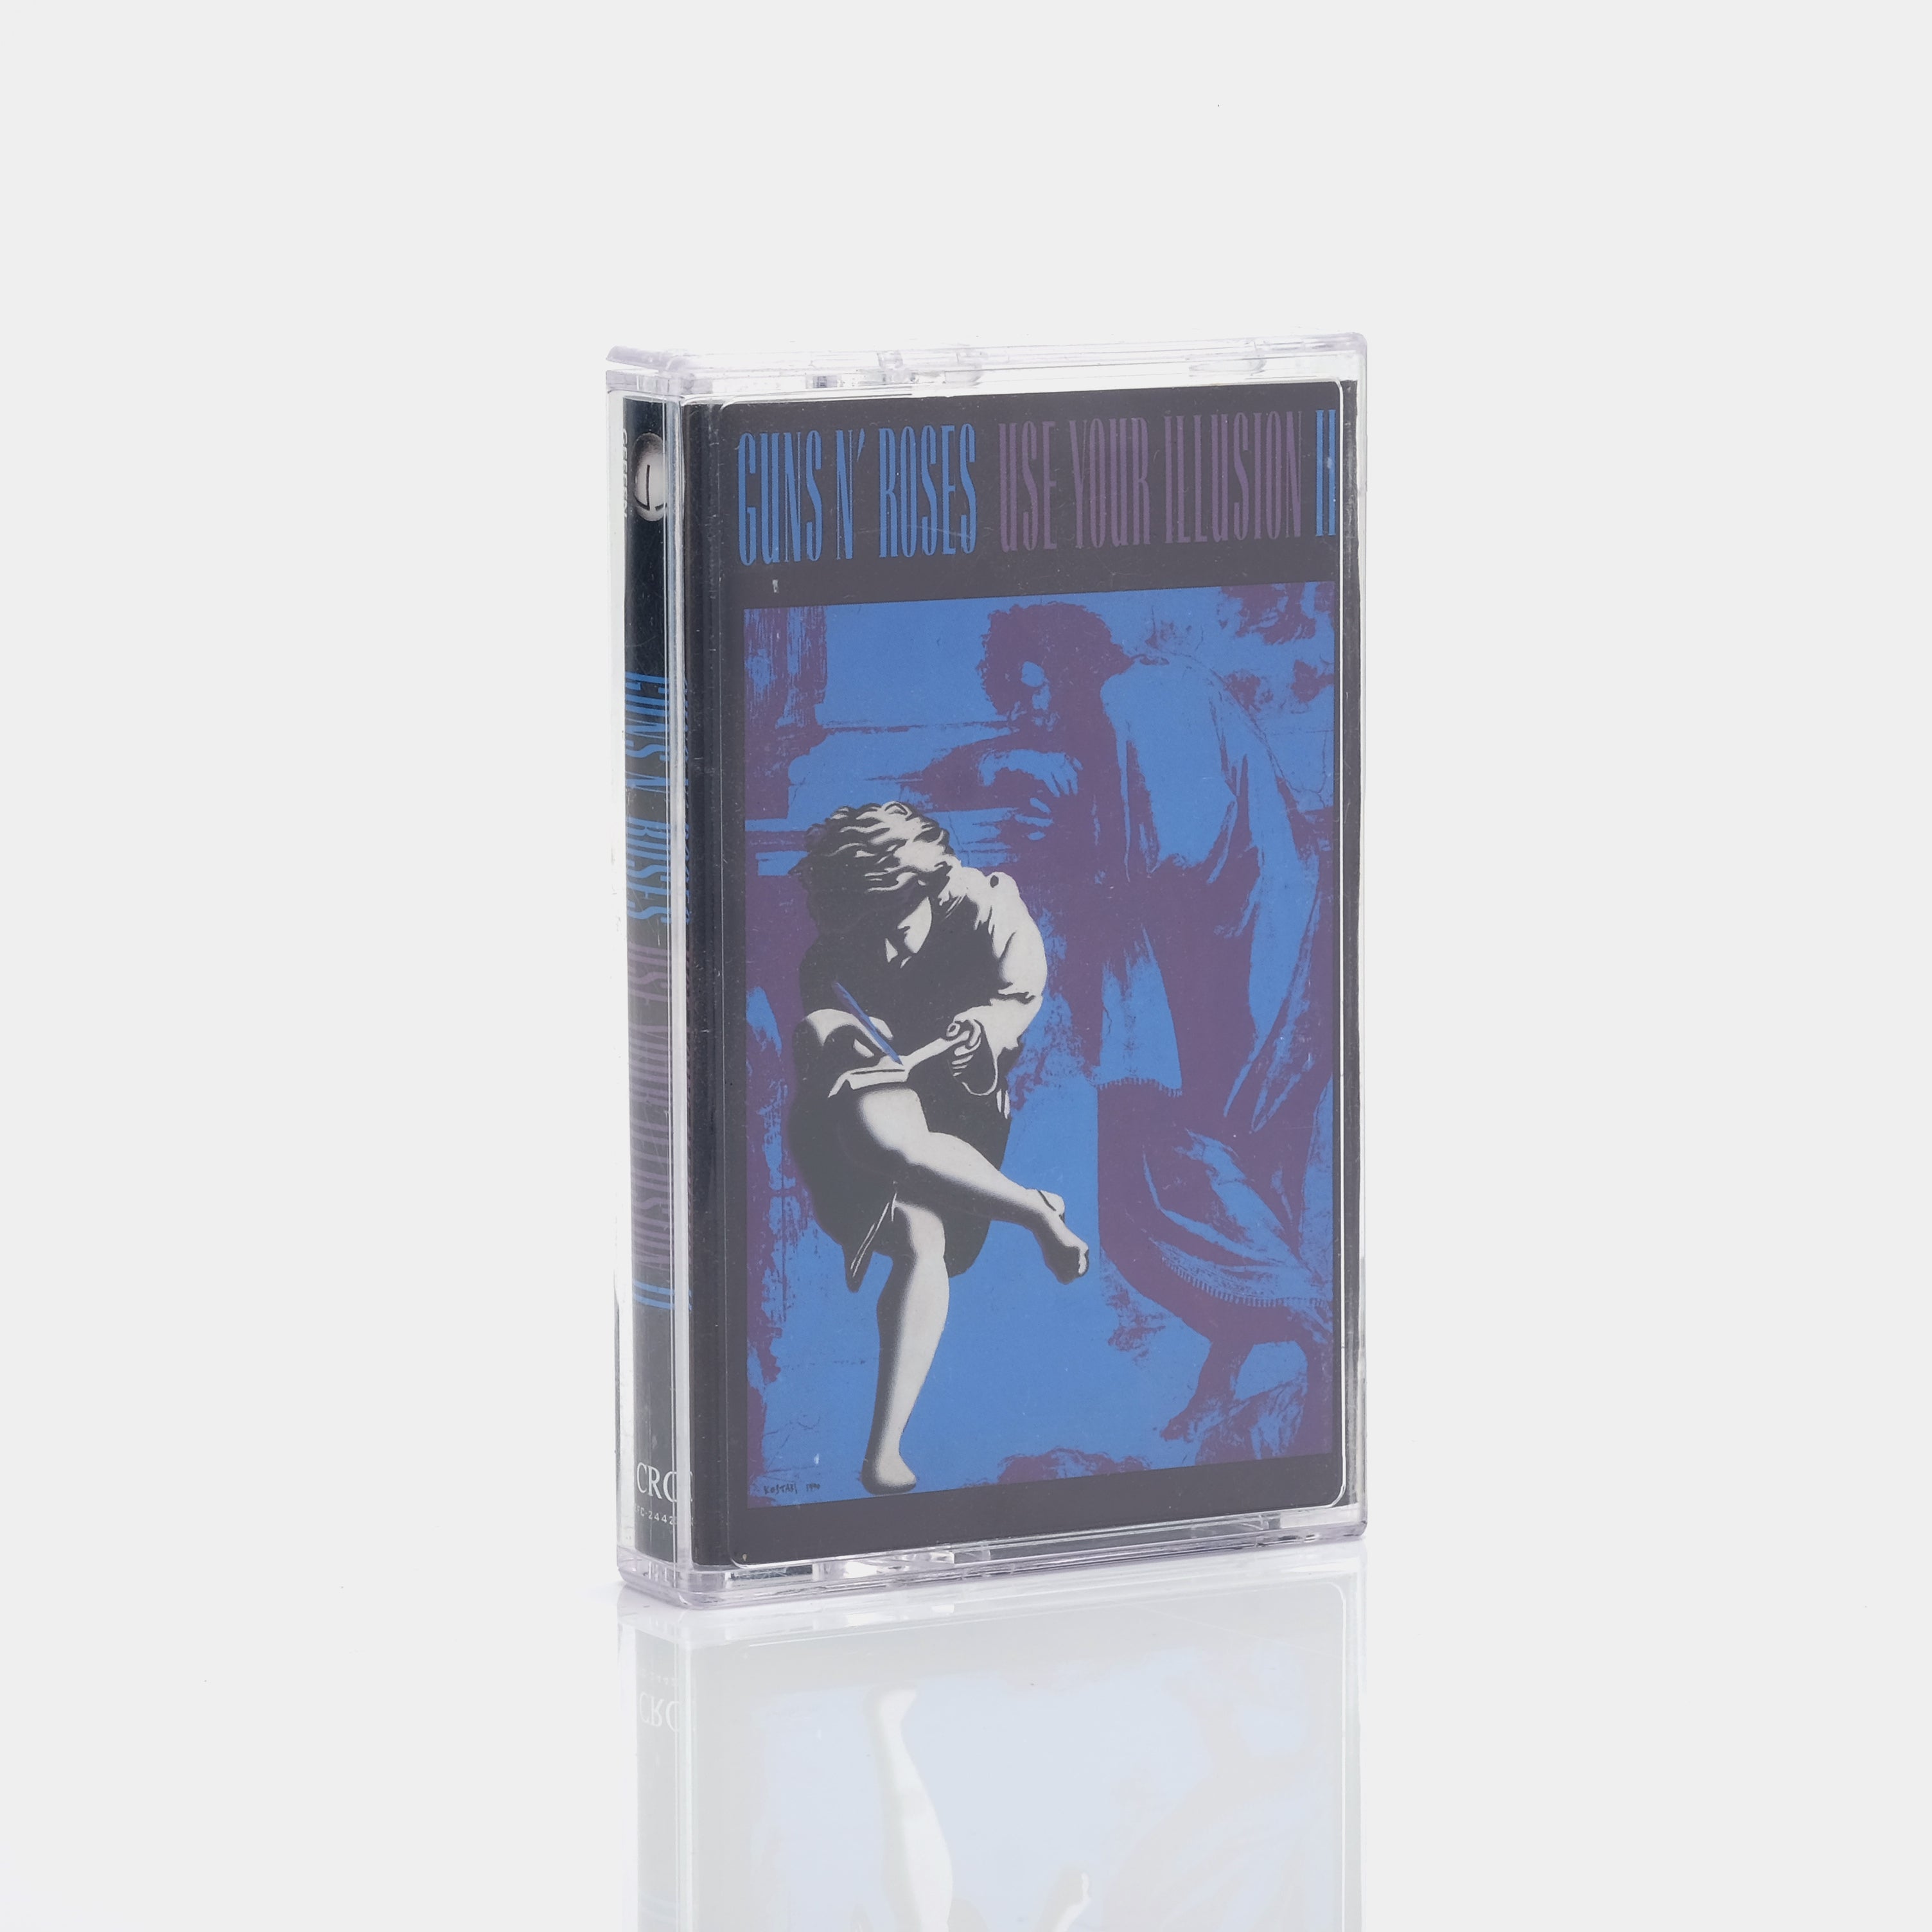 Guns N' Roses - Use Your Illusion II Cassette Tape